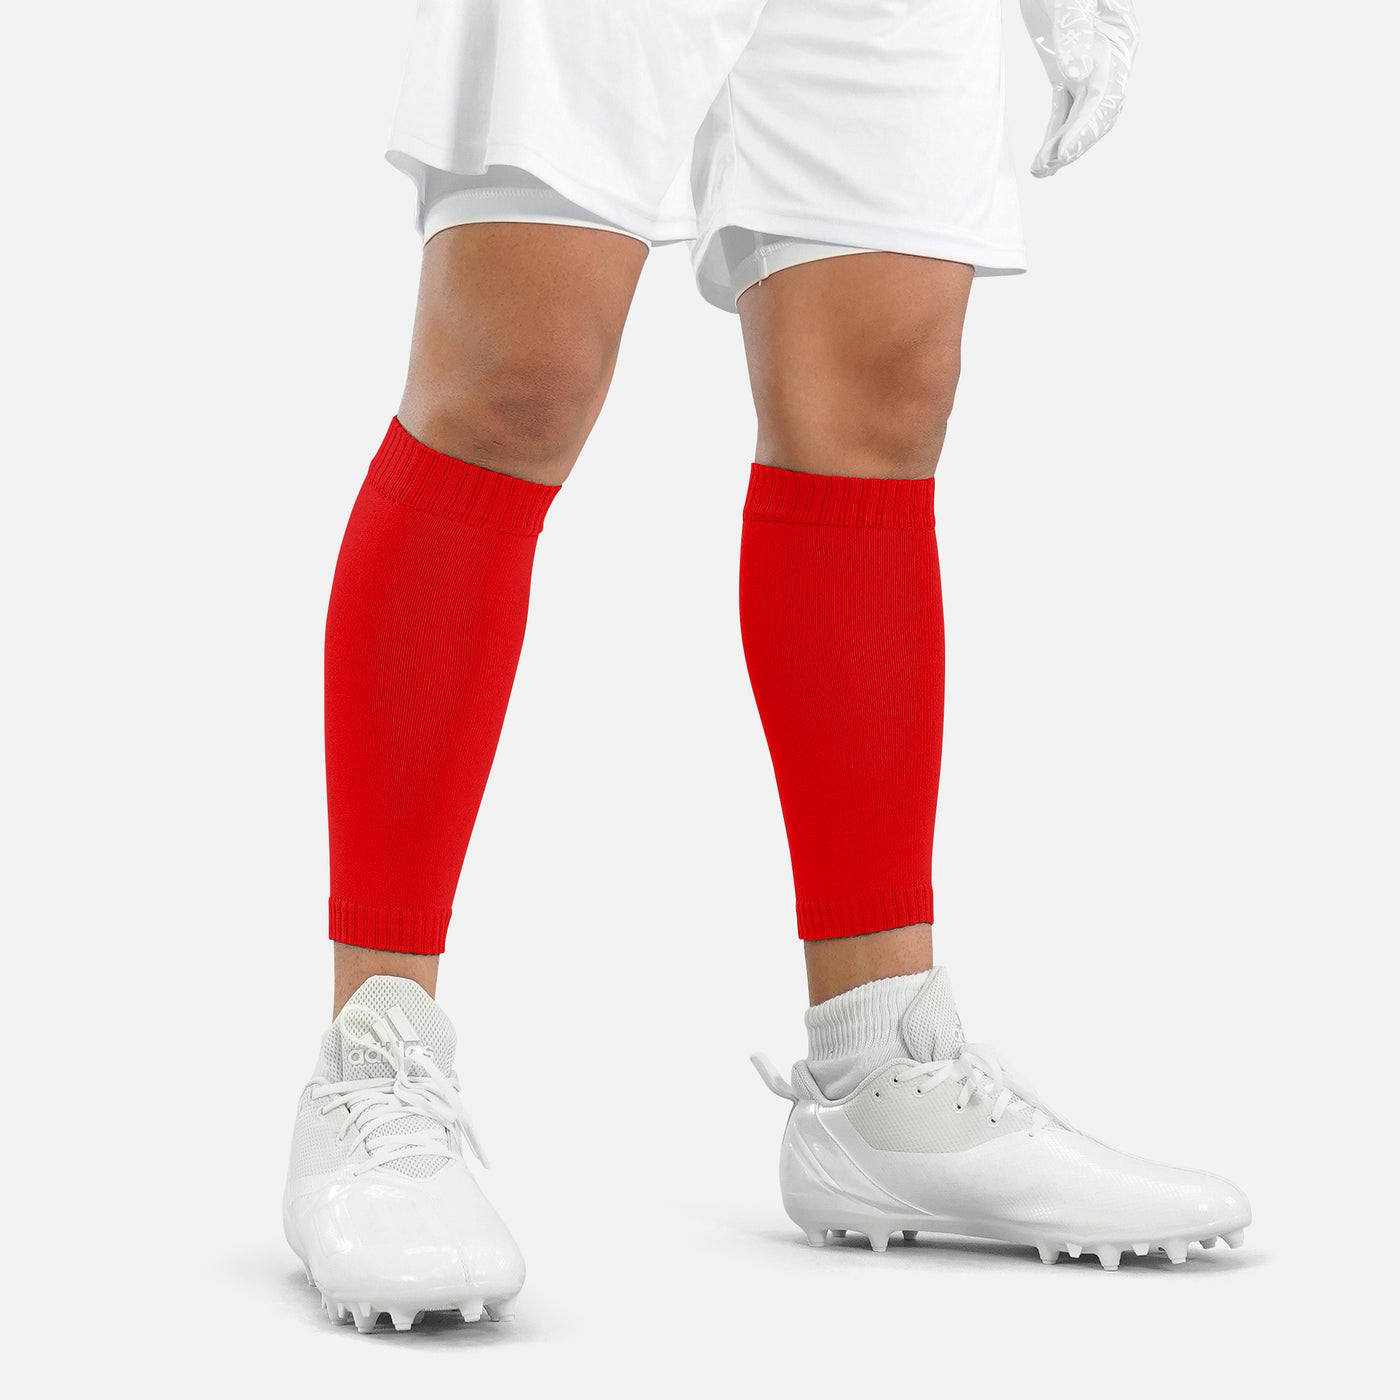 Hue Red Knitted Compression Calf Sleeves